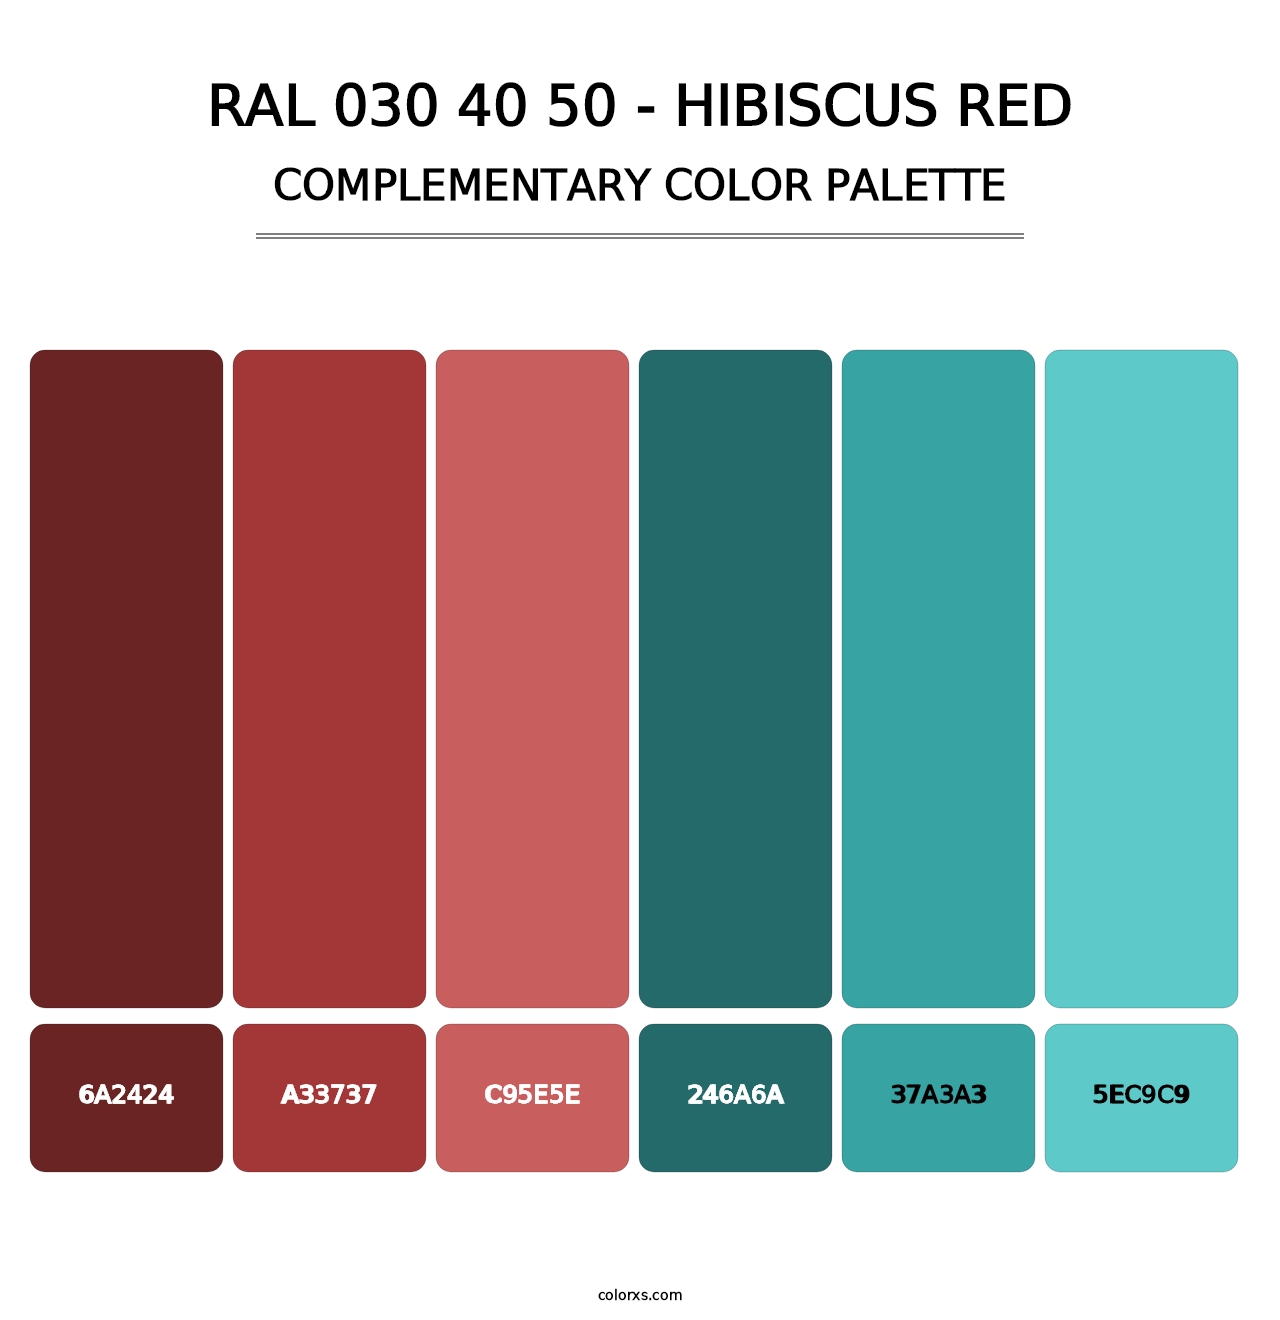 RAL 030 40 50 - Hibiscus Red - Complementary Color Palette